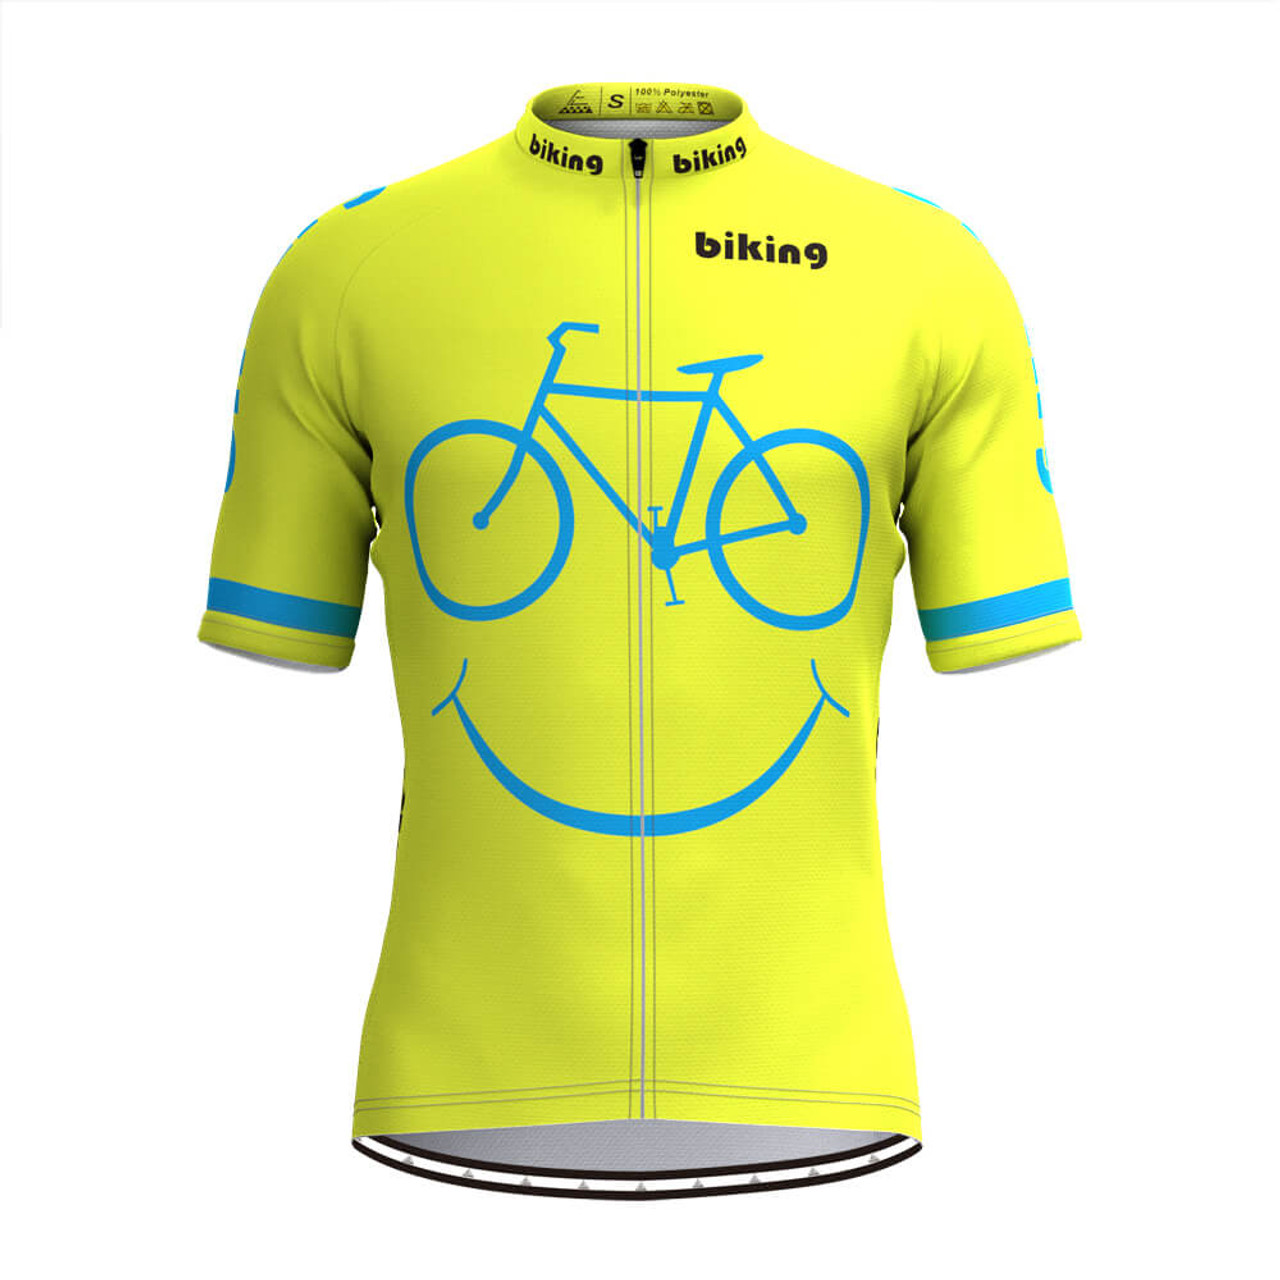 SMILEY JERSEY — Shim's Ride